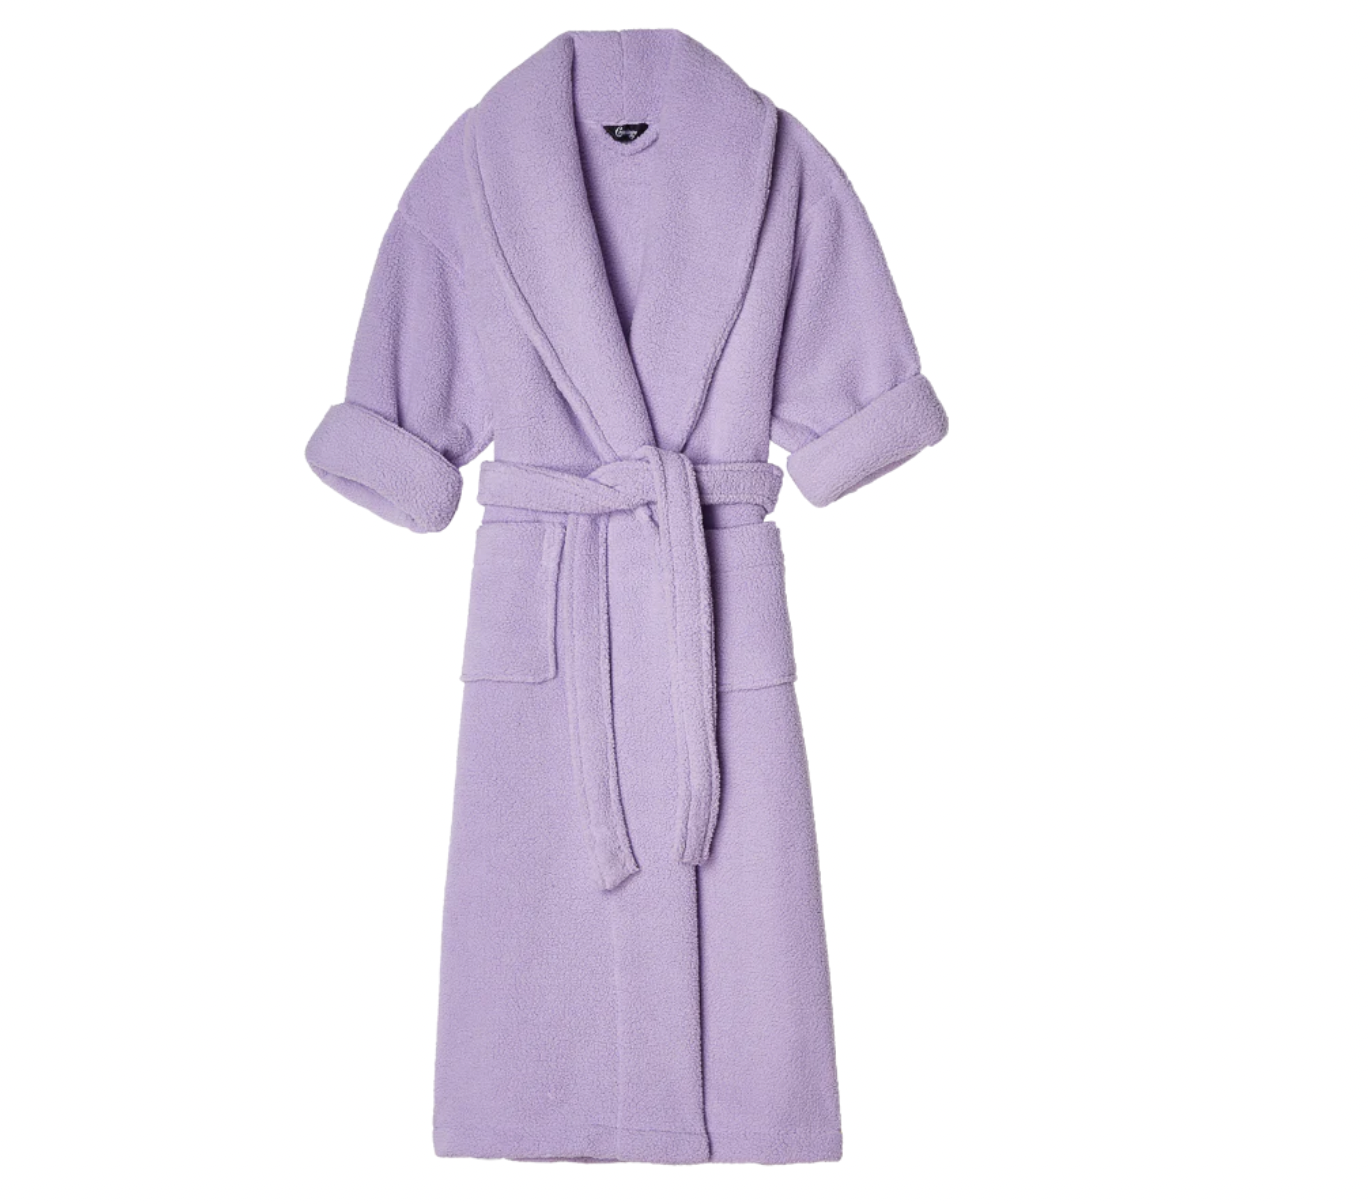 Cravings Teddy Robe in Lilac